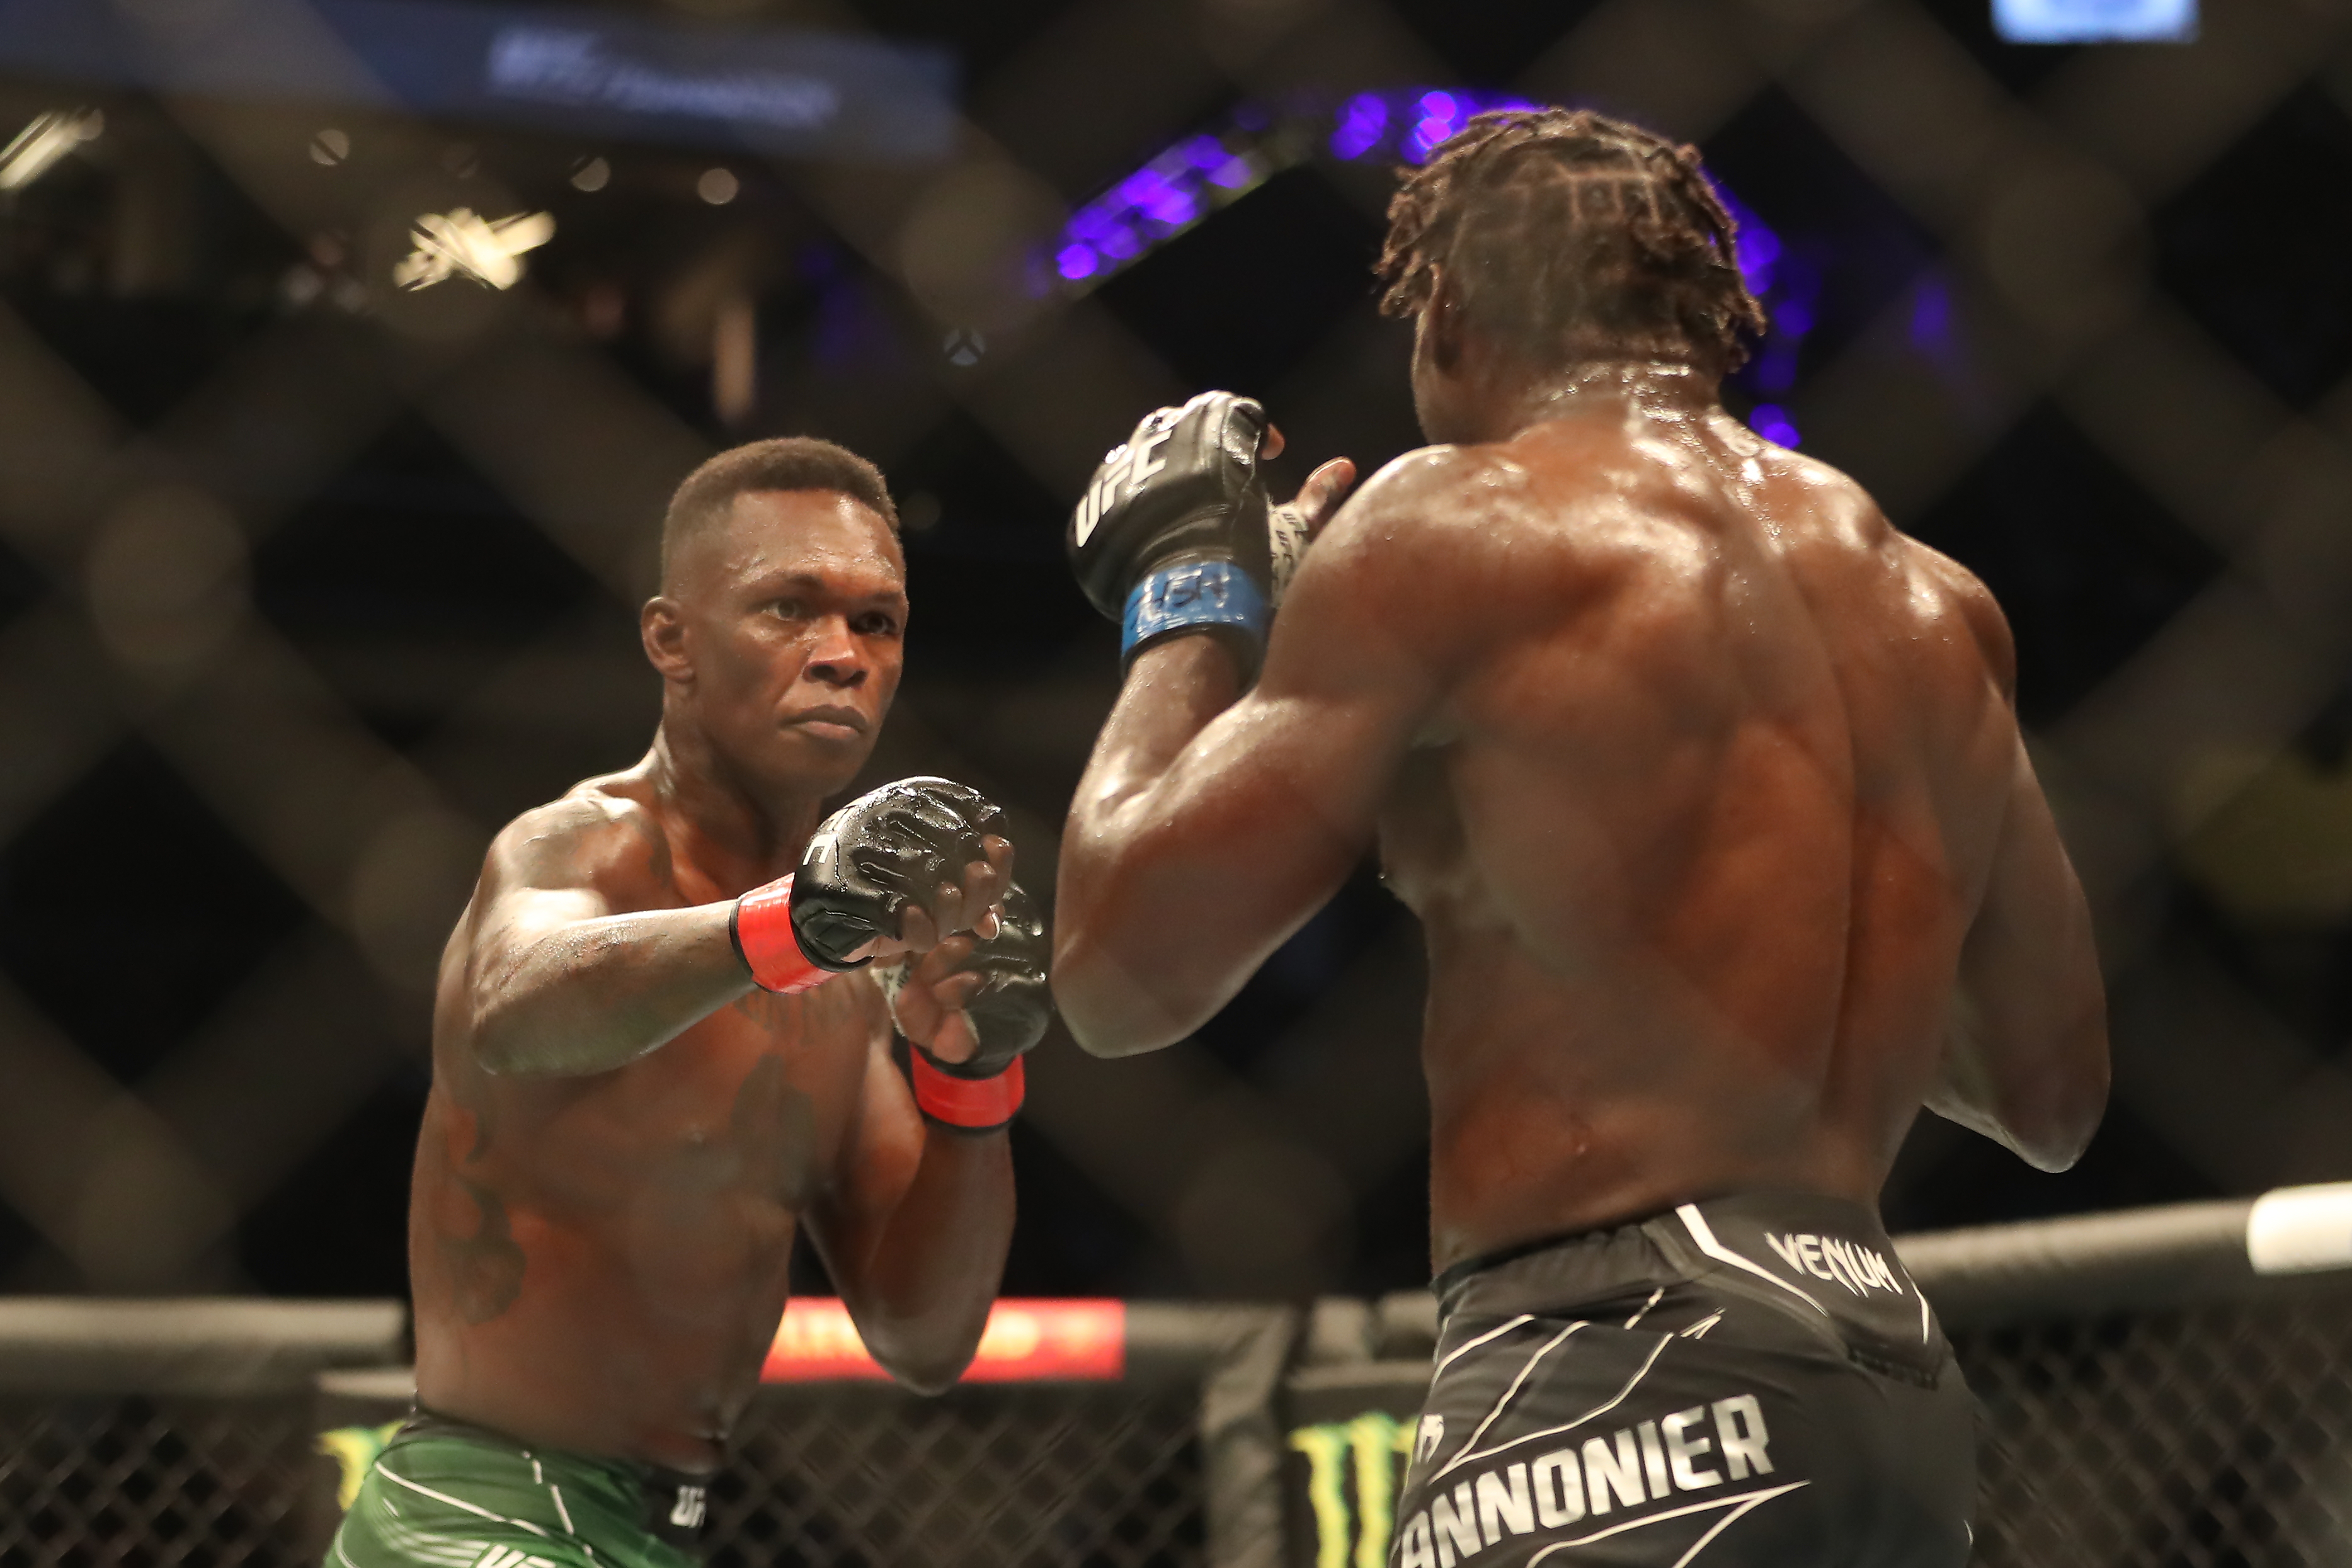 Israel Adesanya during is UFC 276 title defense against Jared Cannonier. 